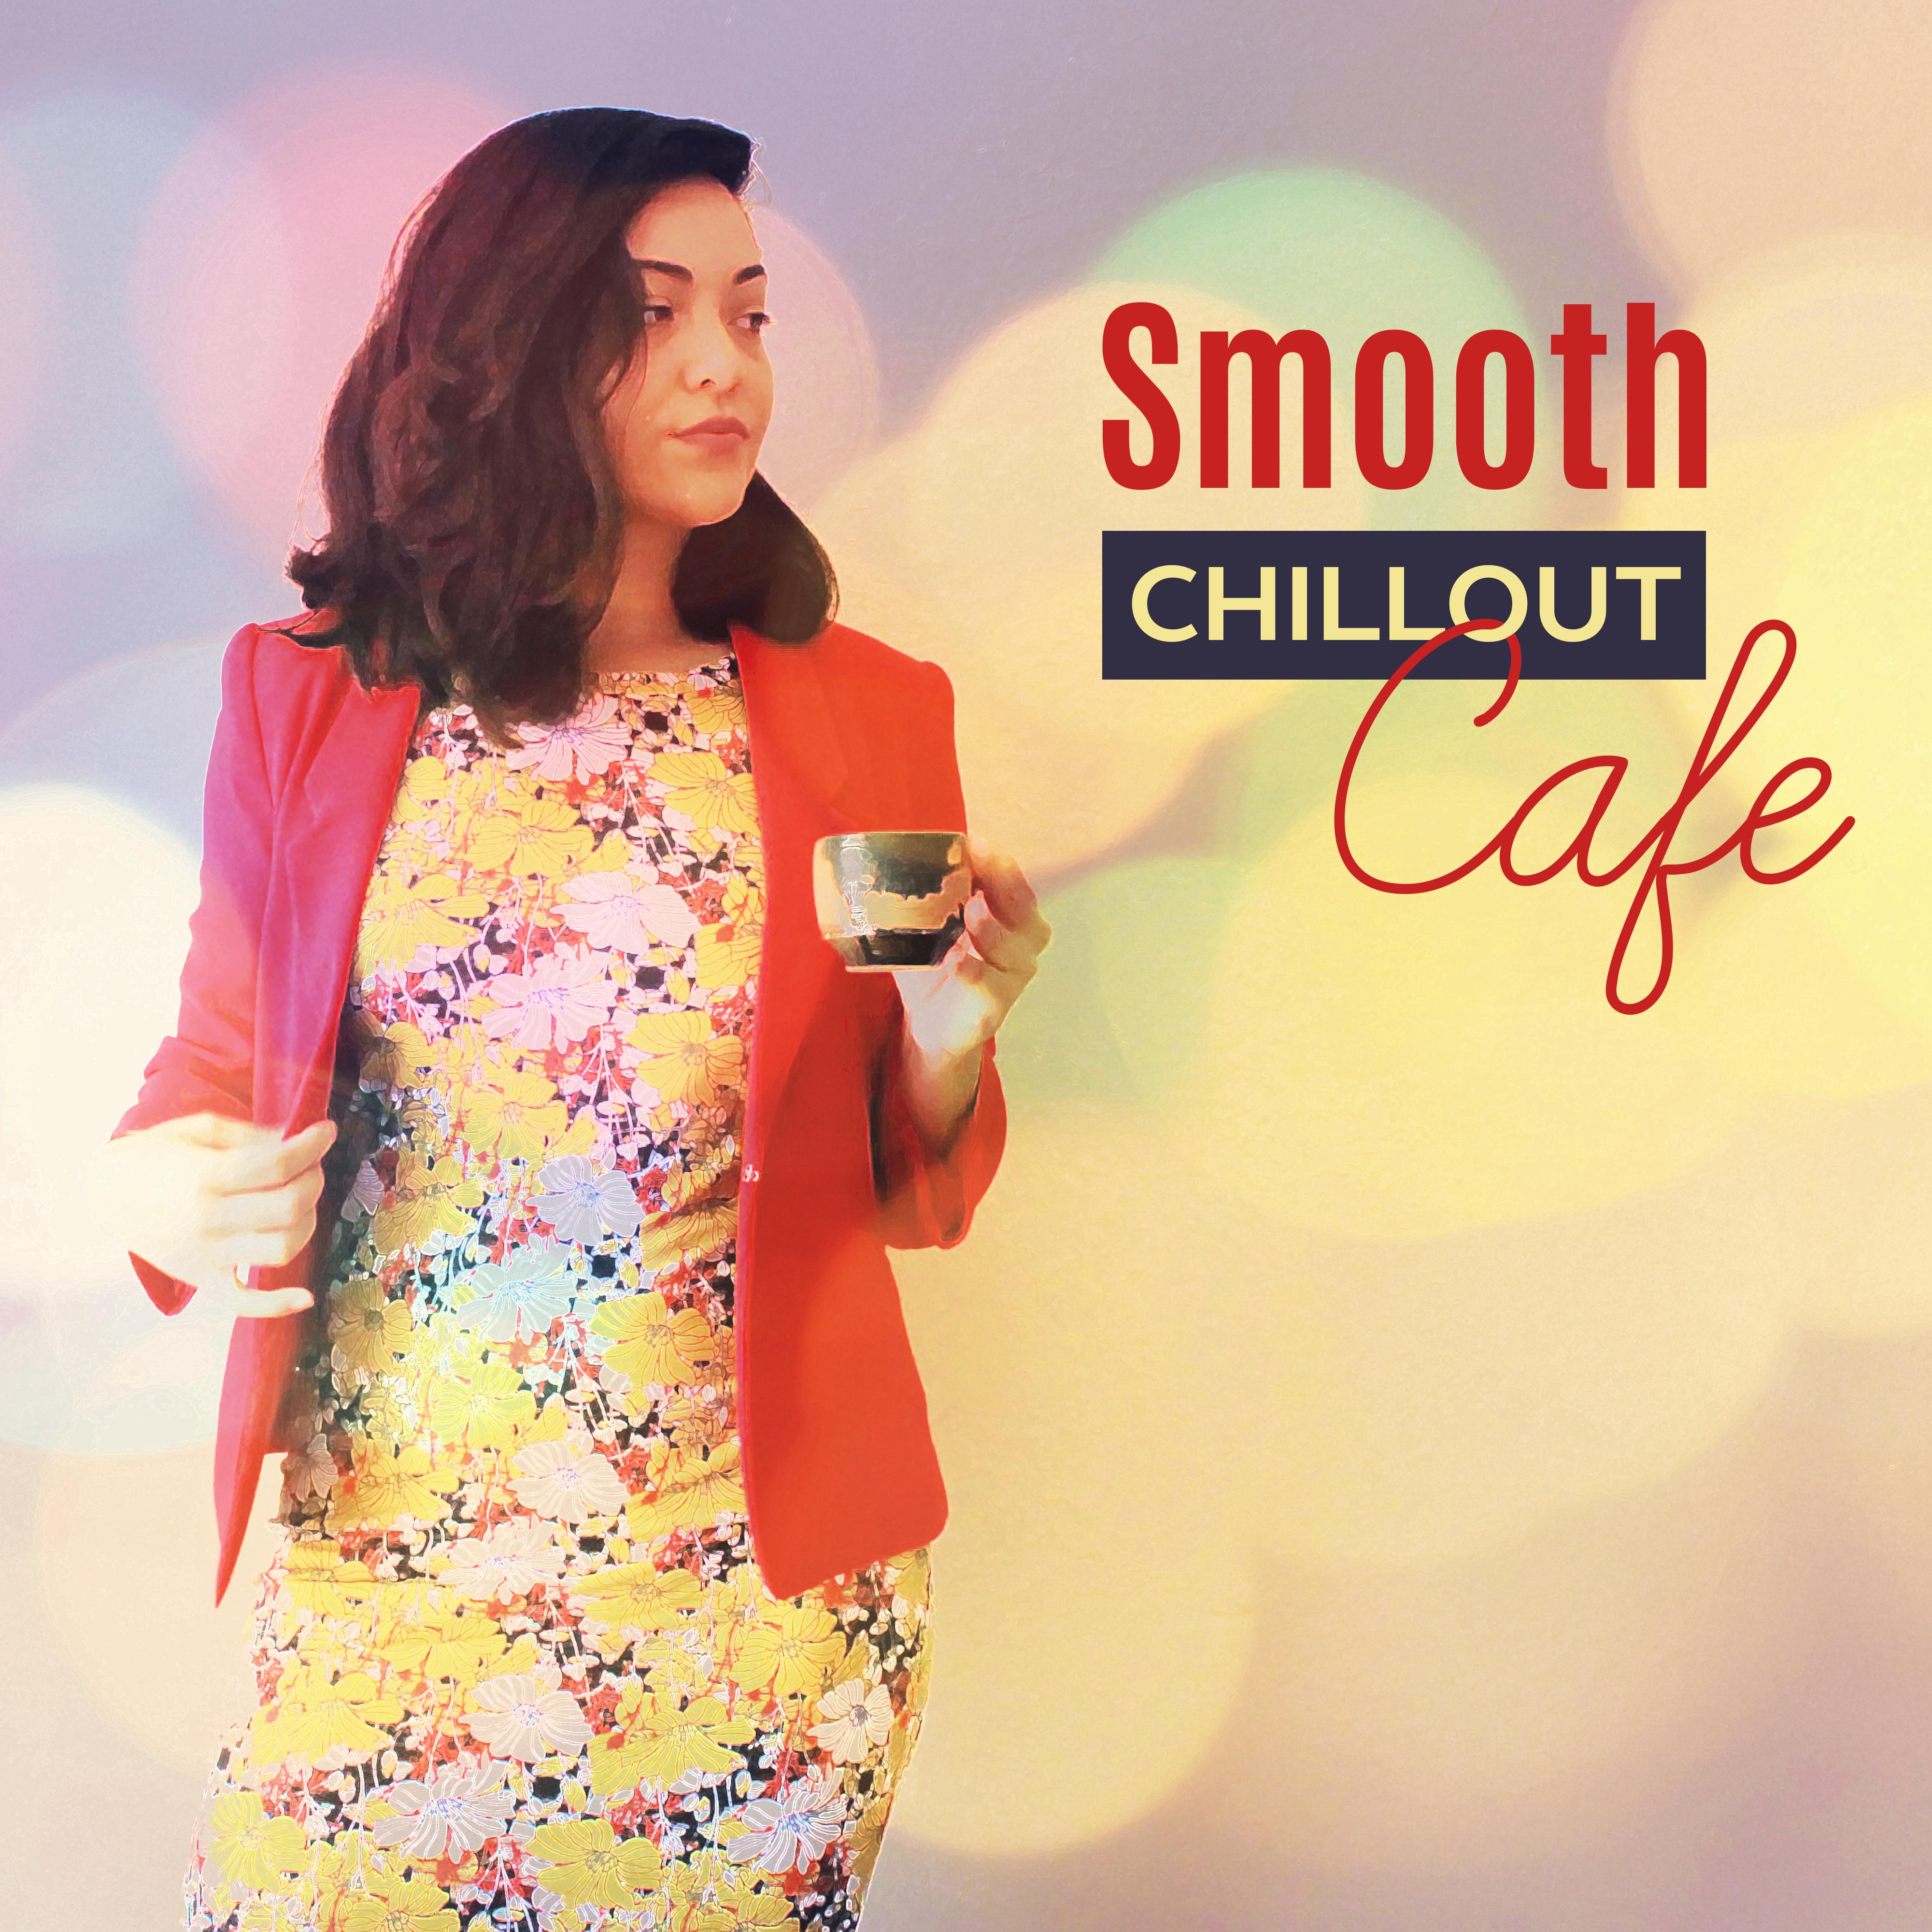 Smooth Chillout Cafe – Relaxing Chill Out Music, Electro Vibes, Lounge